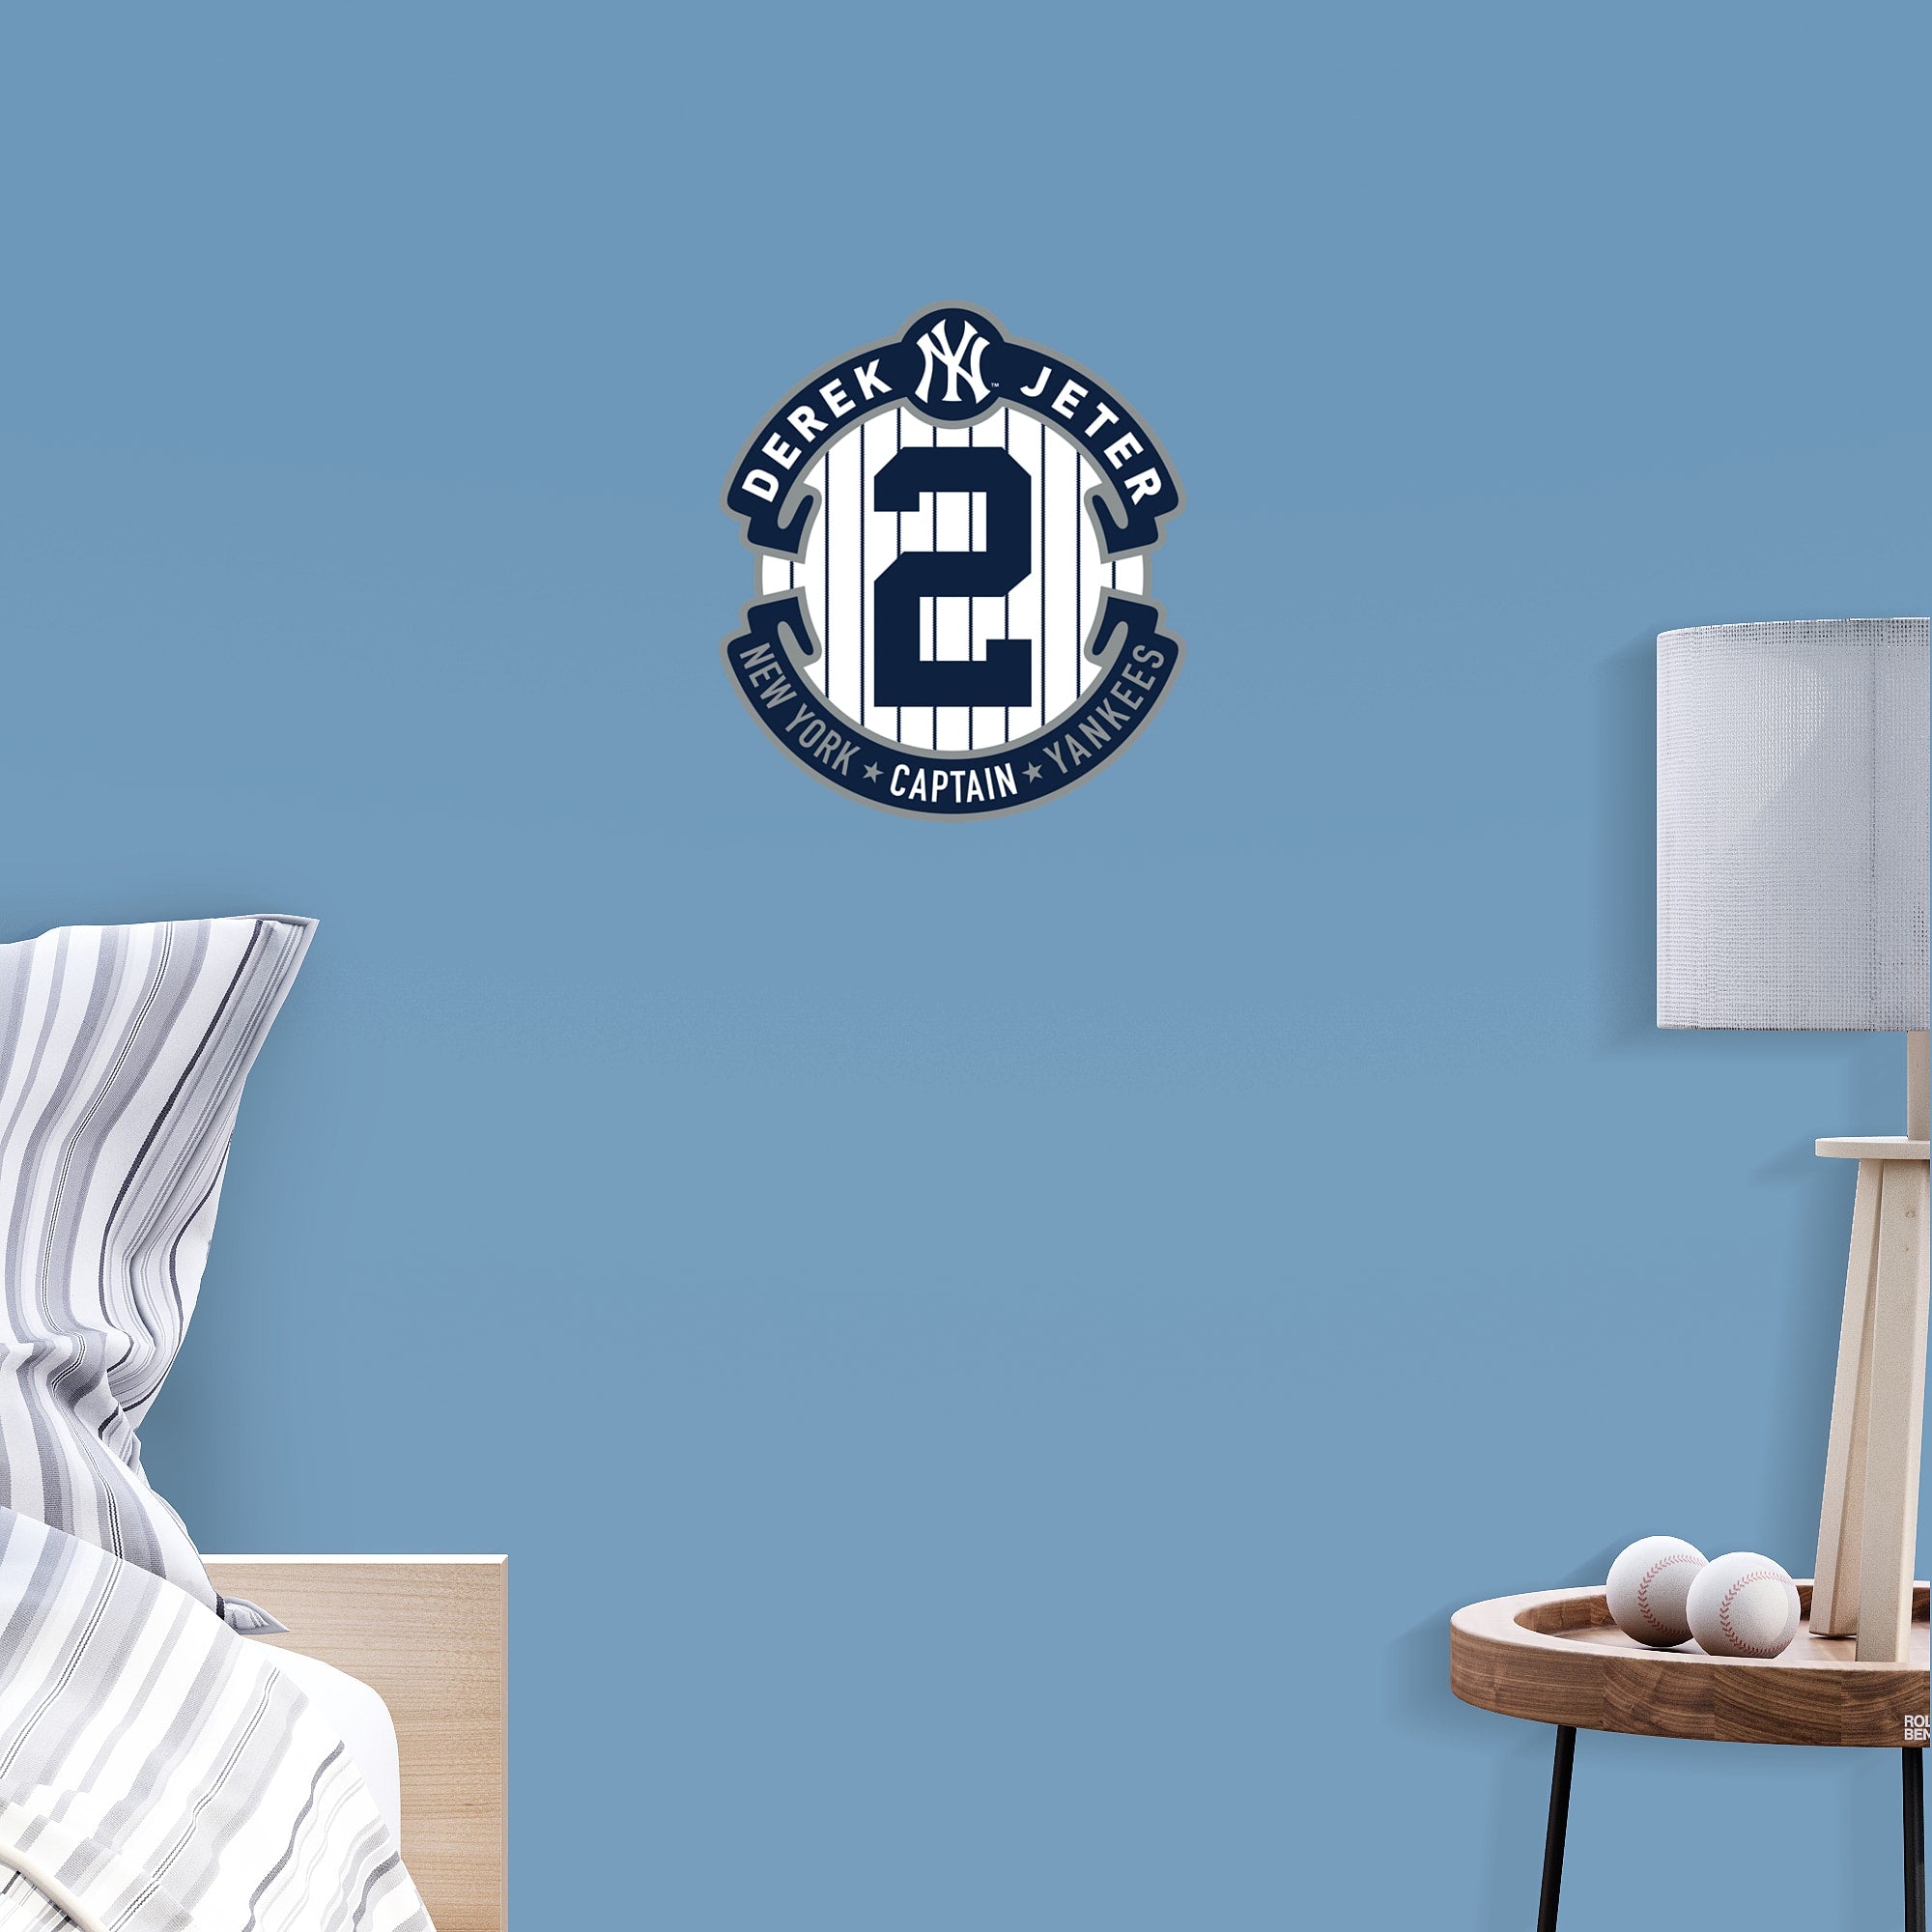 Derek Jeter for New York Yankees: Logo - Officially Licensed MLB Removable Wall Decal Large by Fathead | Vinyl